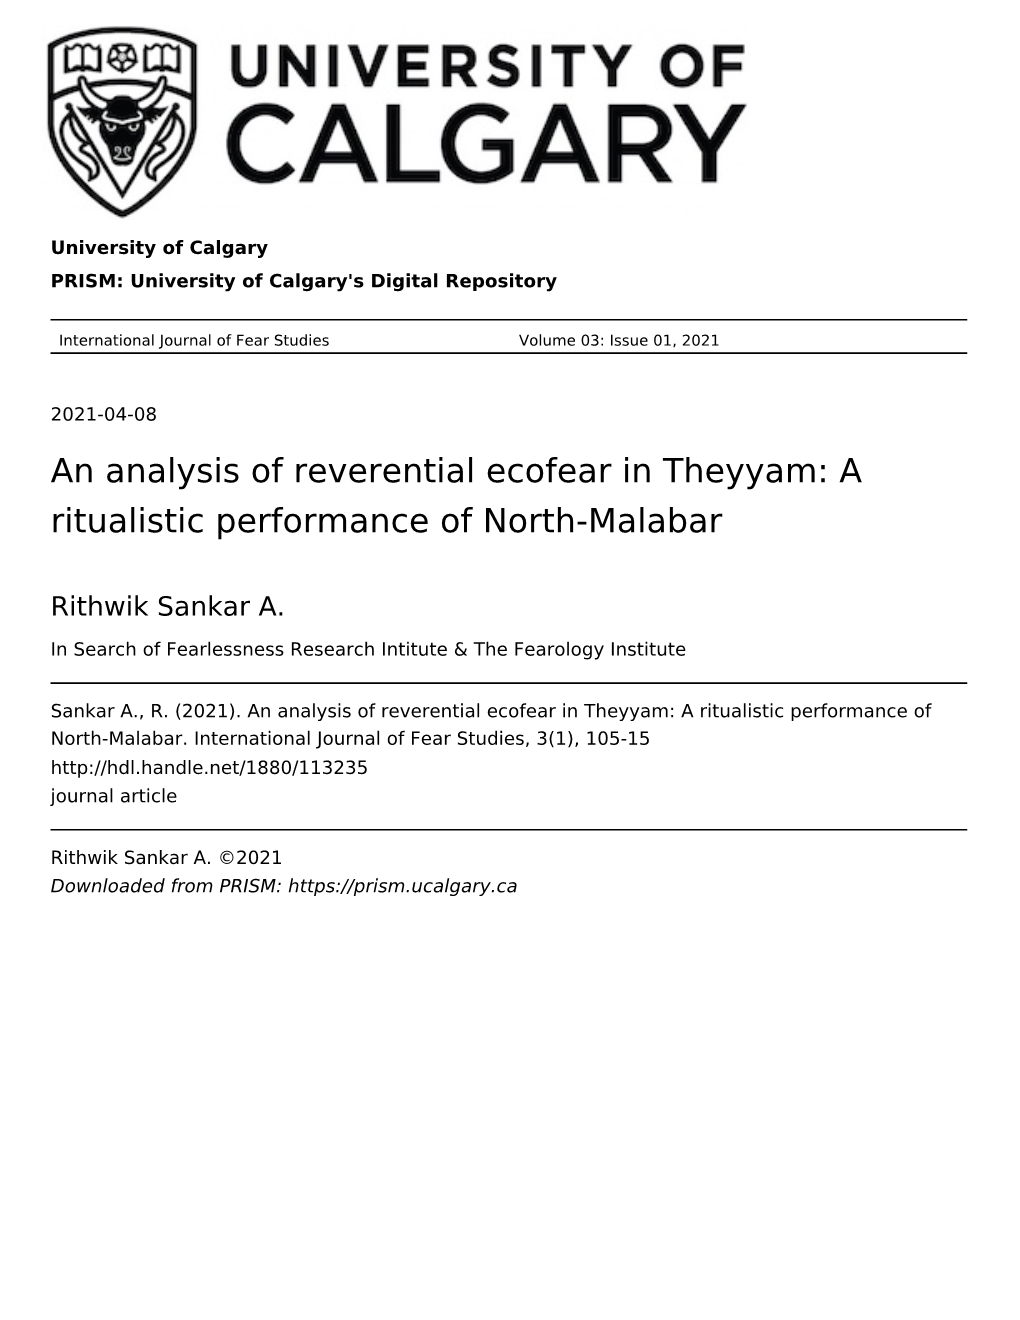 An Analysis of Reverential Ecofear in Theyyam: a Ritualistic Performance of North-Malabar